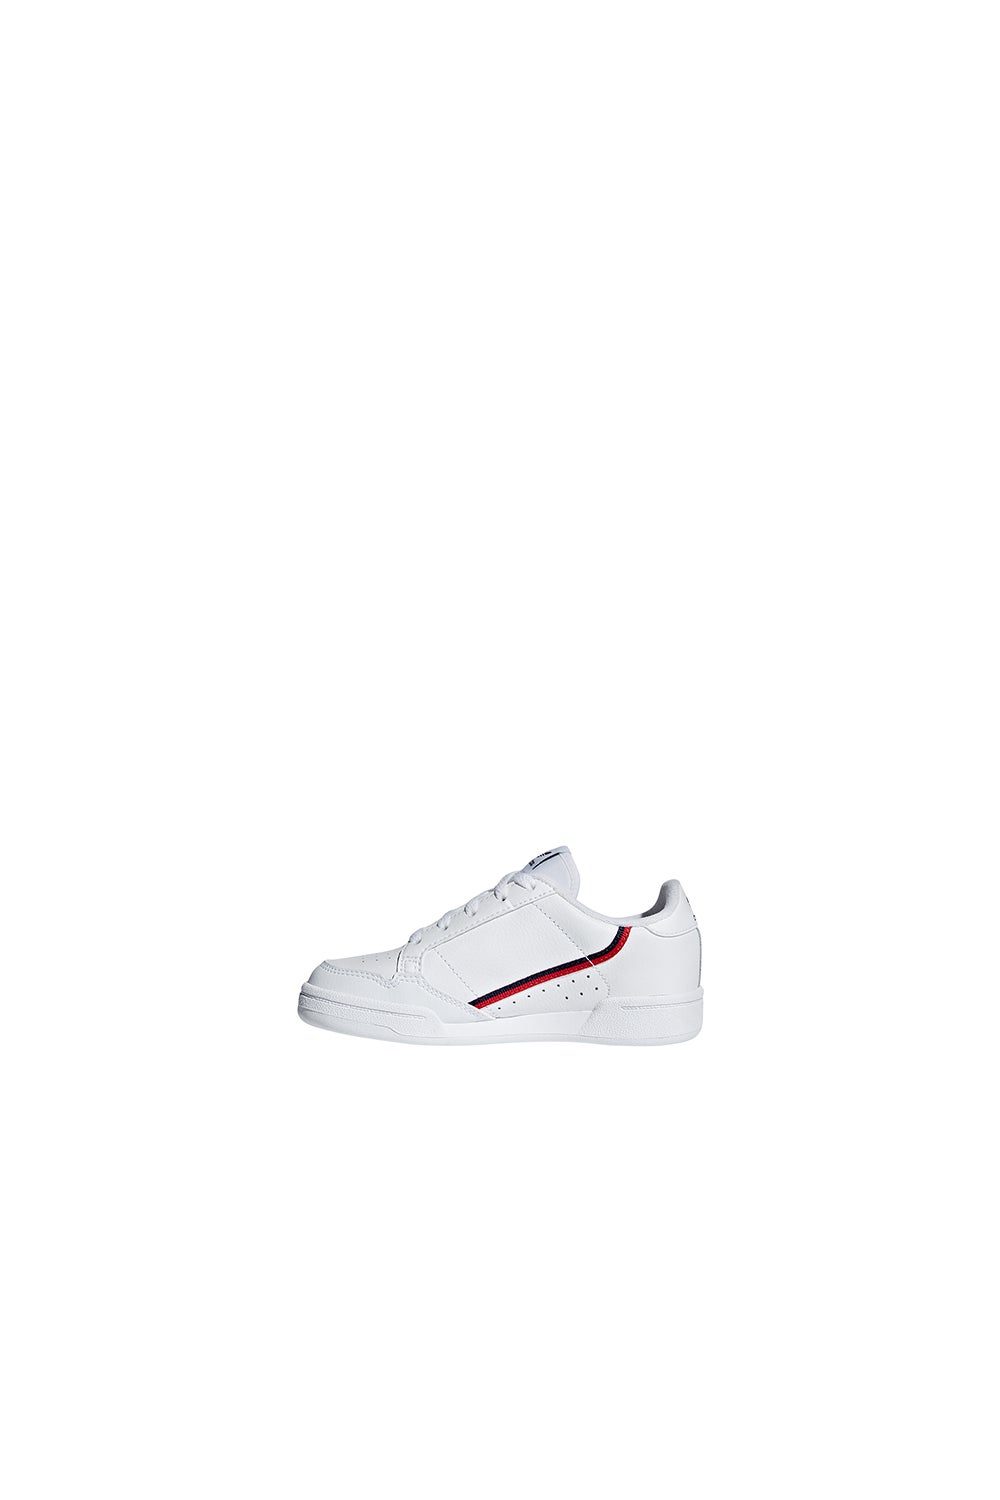 adidas Continental 80 Kids Shoes Cloud White